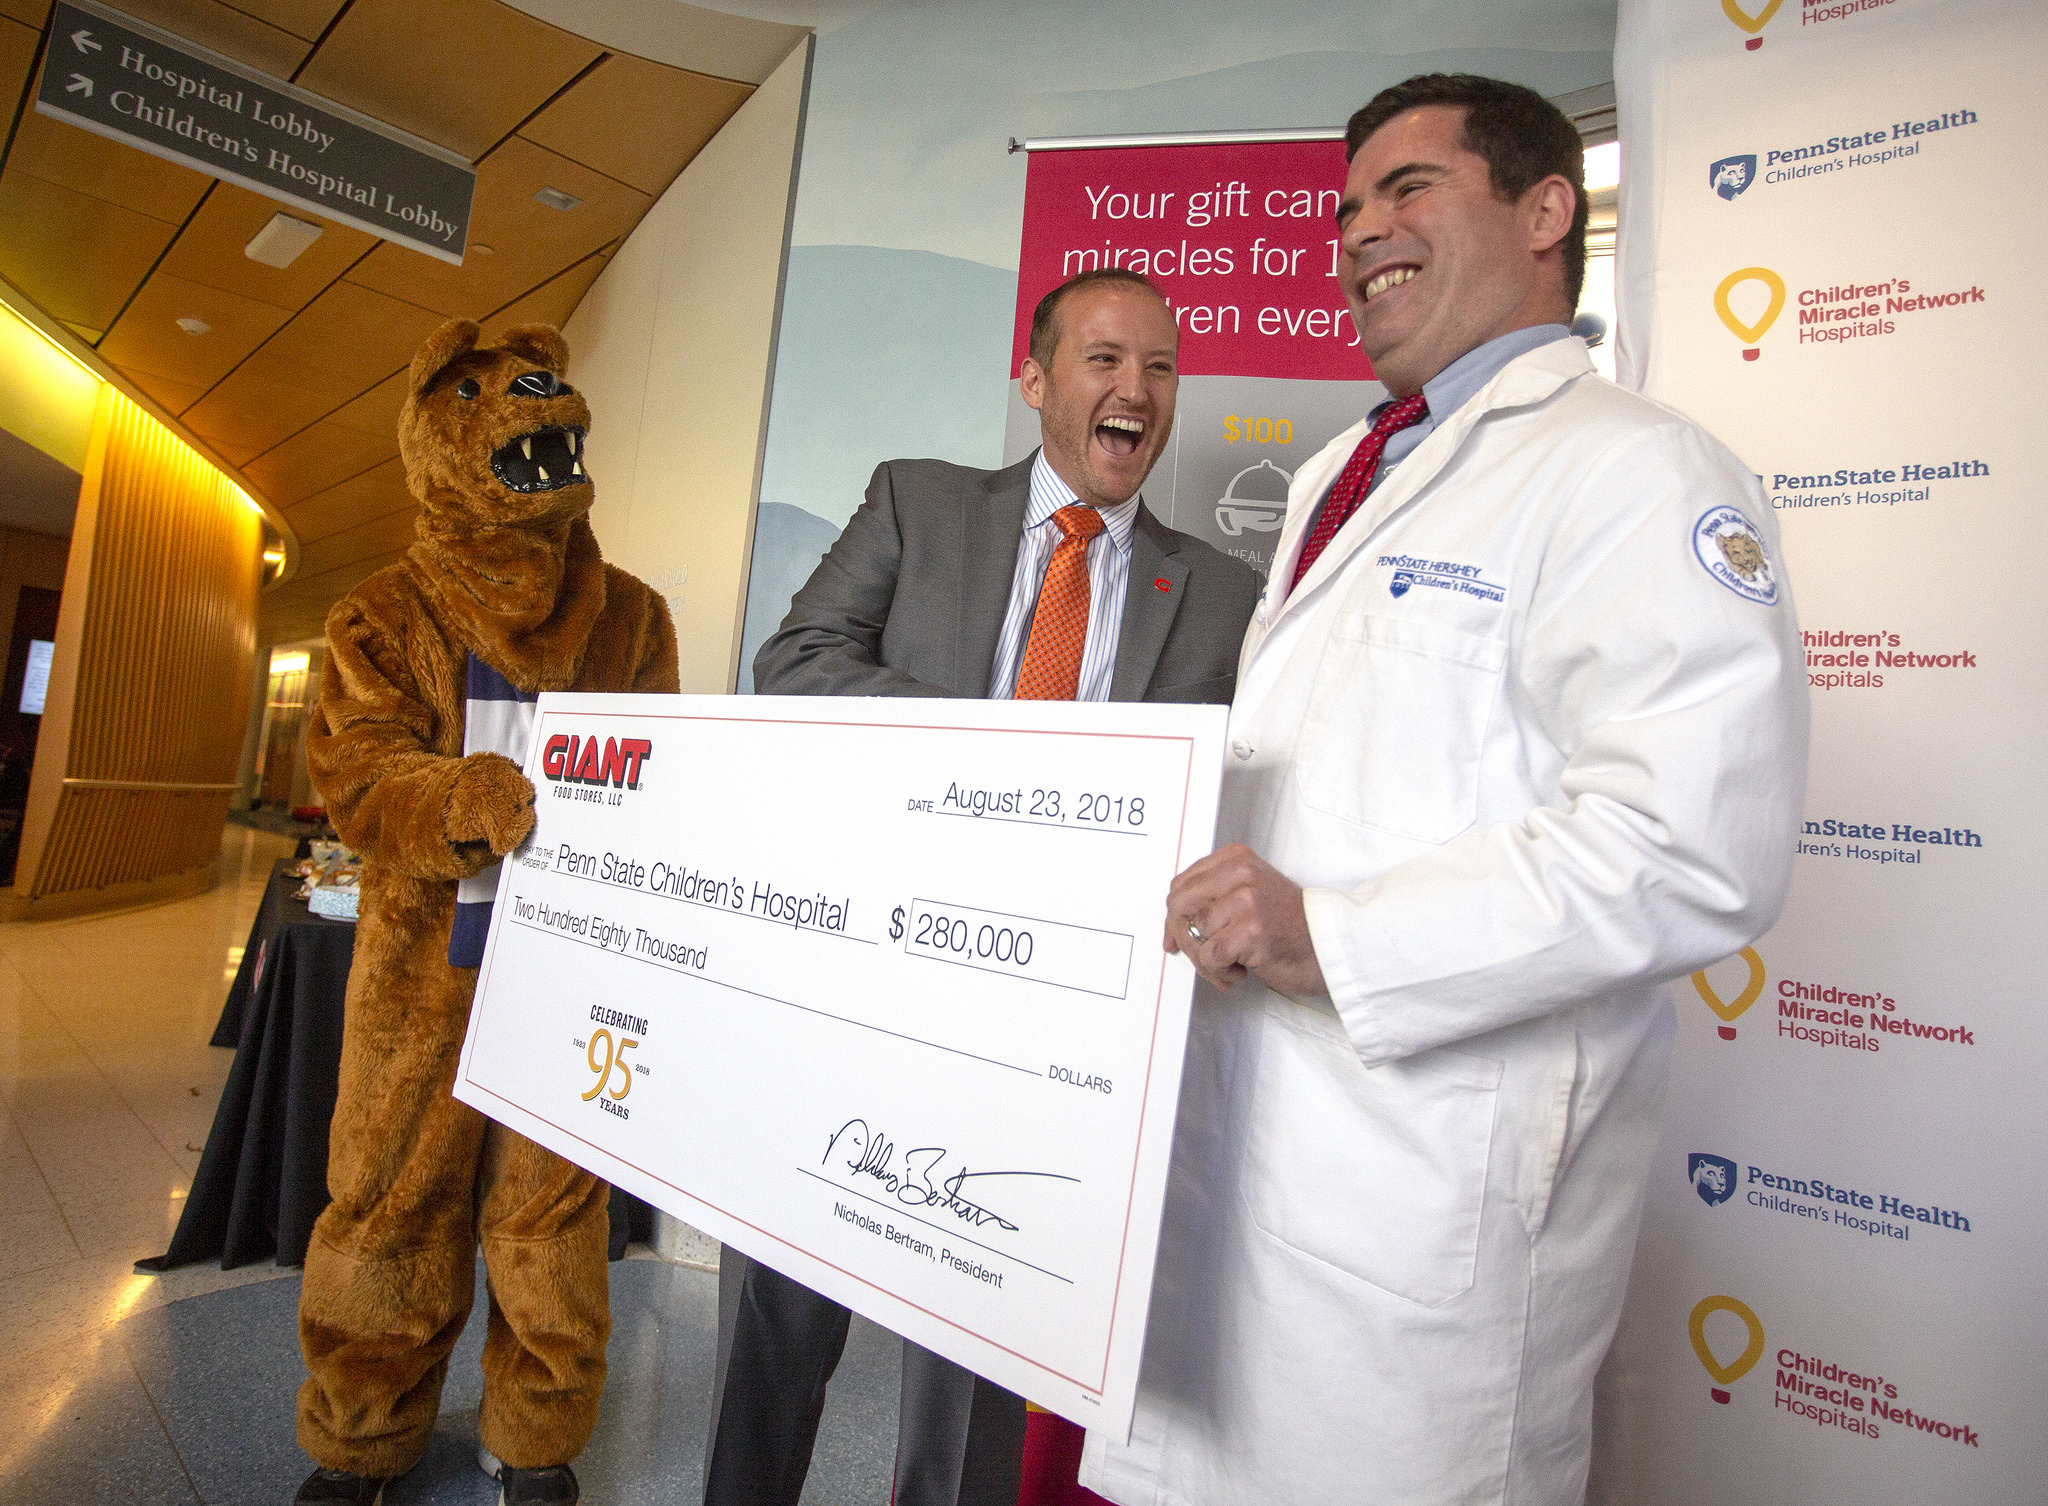 A man in a suit hands a giant check to a man in a medical coat. Both men are smiling as the Nittany Lion mascot looks on.